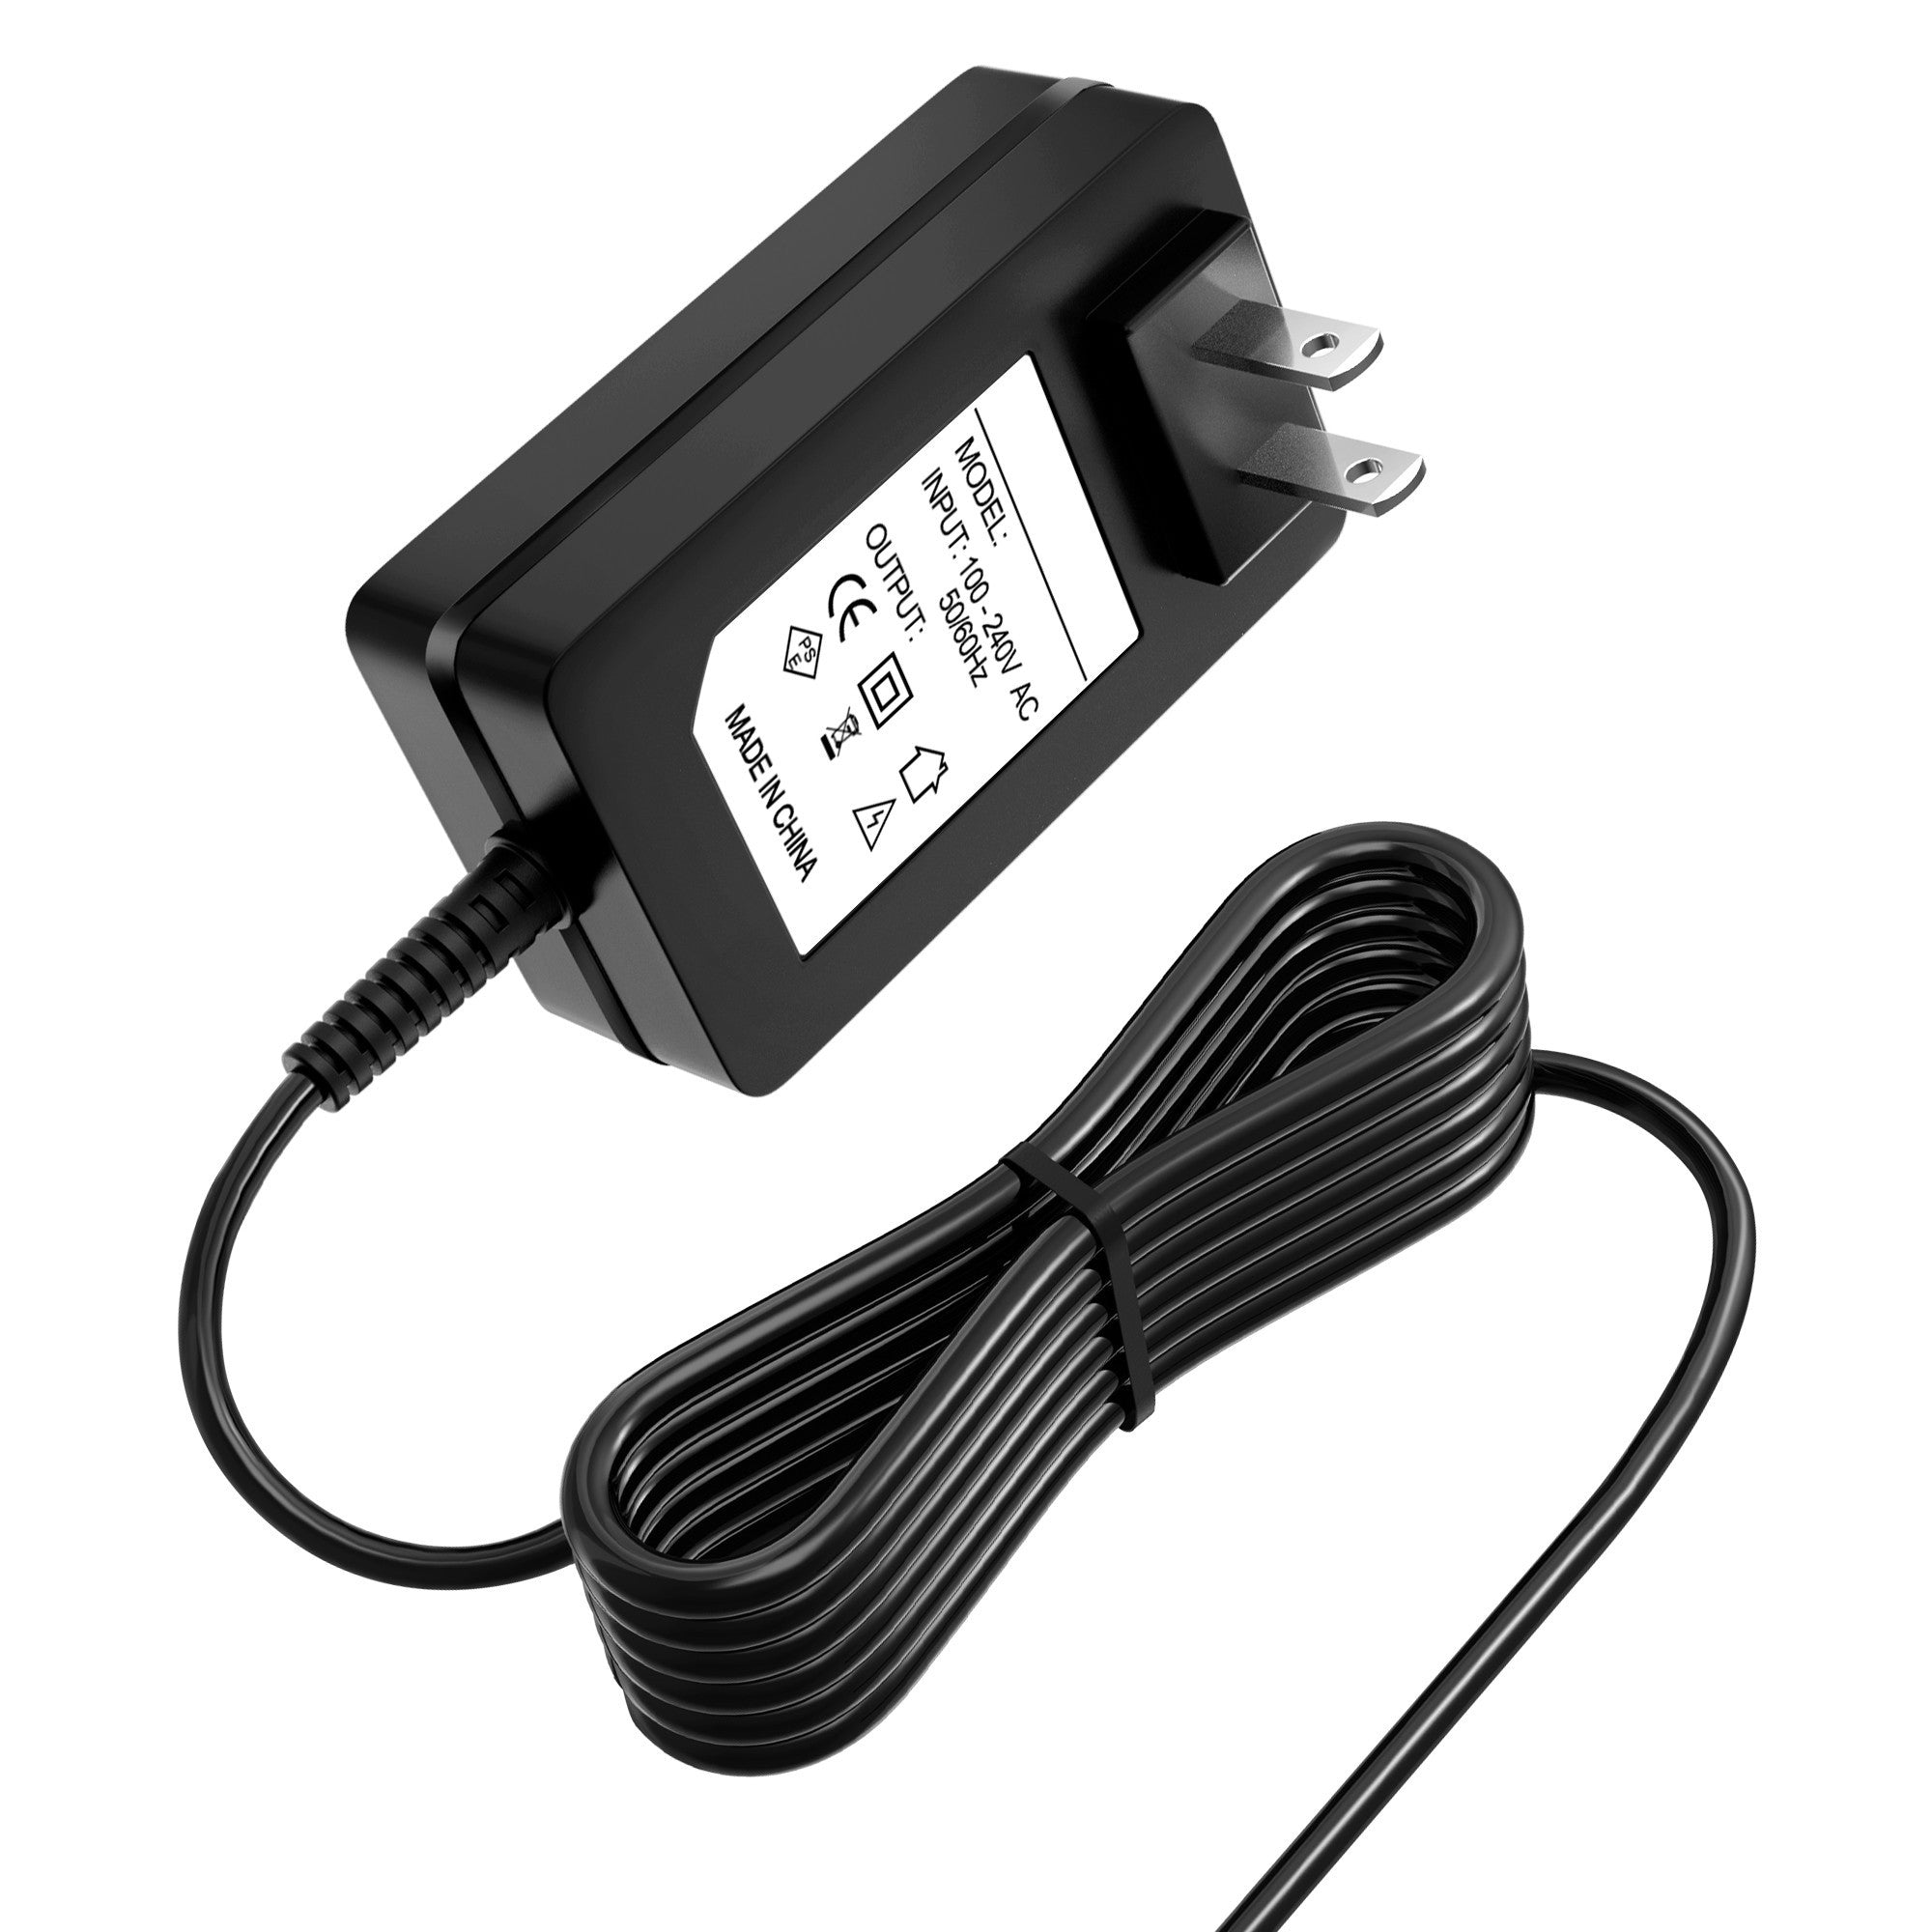 AbleGrid AC DC Adapter Compatible with JAMECO ReliaPro Relia Pro DDU300050 PN 199523 Plug In Class 2